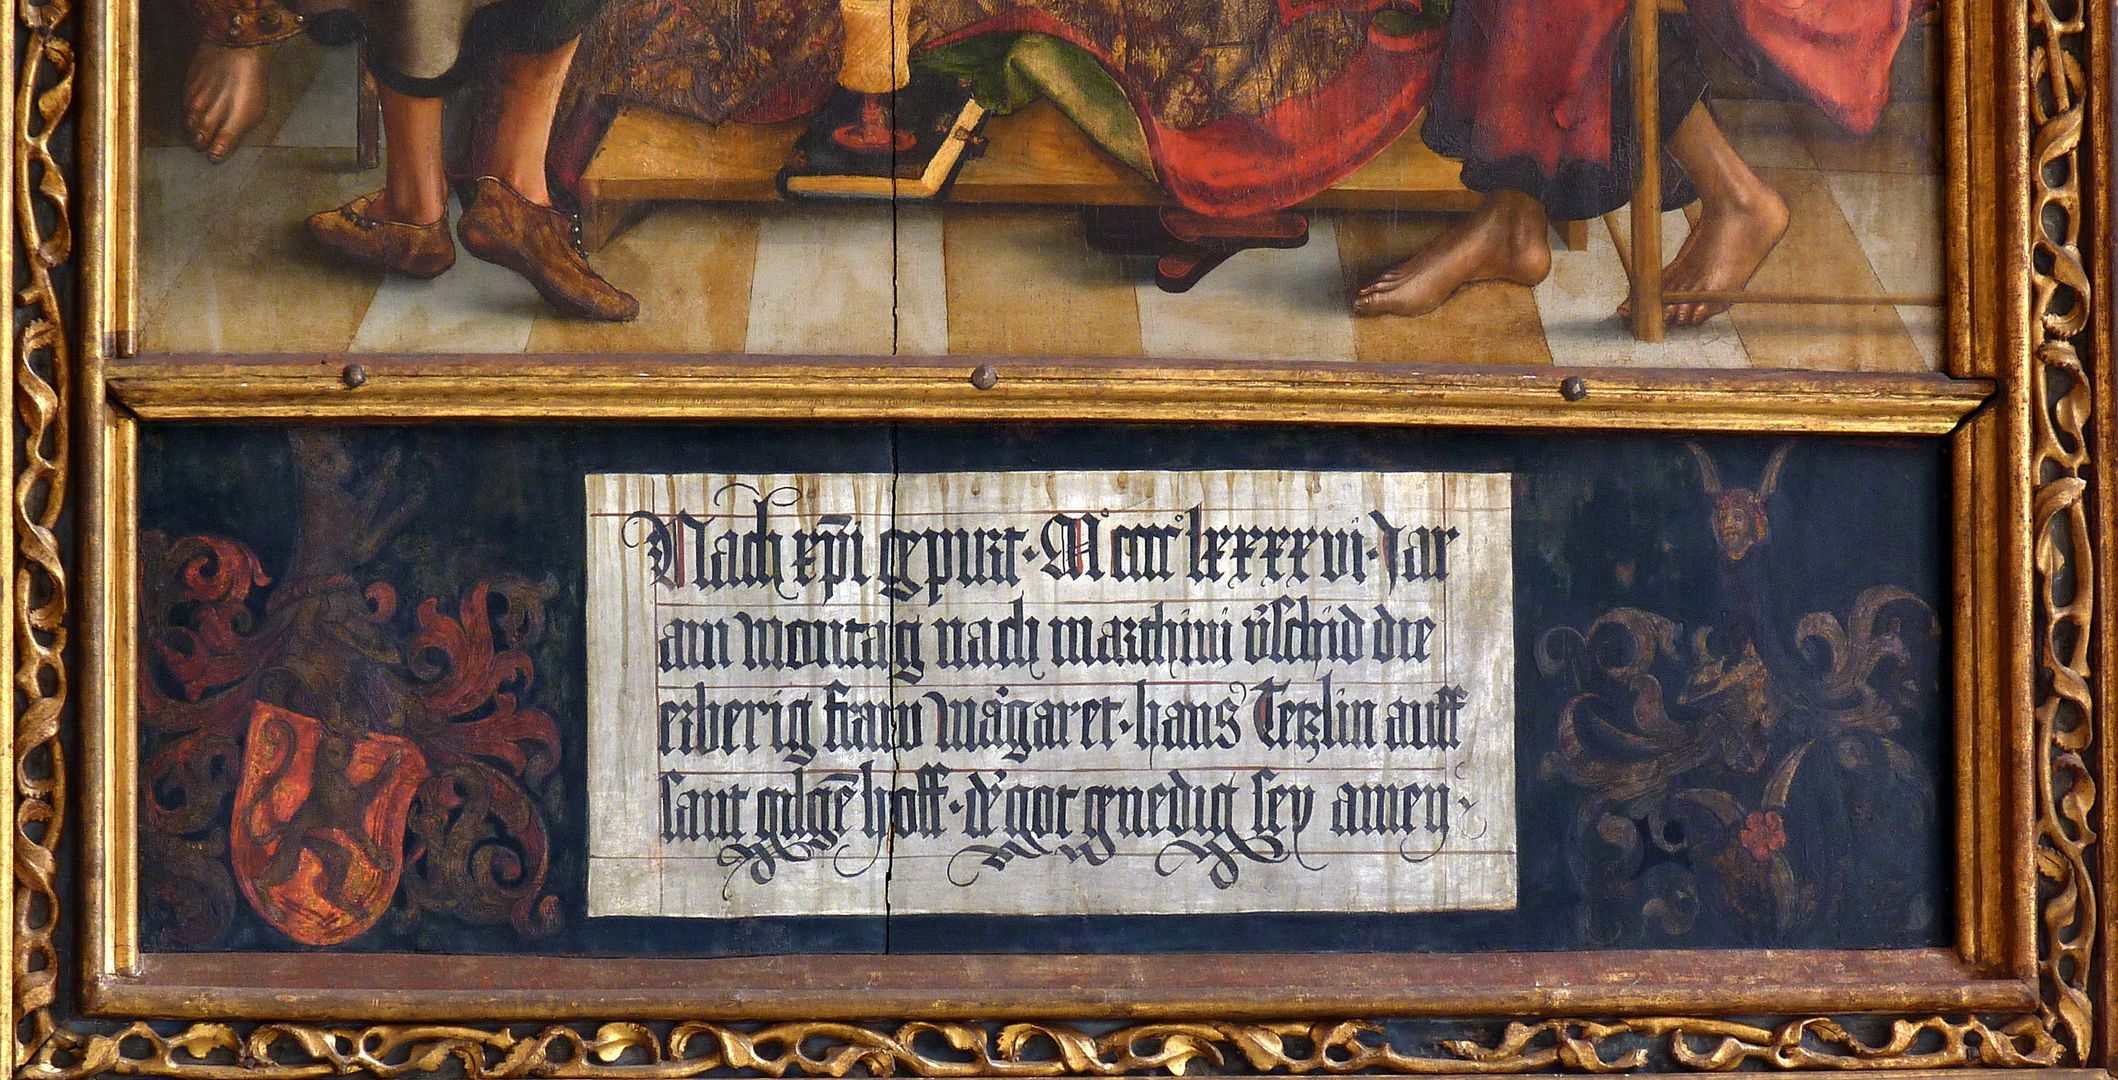 Epitaph of Margaret Groland Death inscription and coat of arms Tetzel and Groland